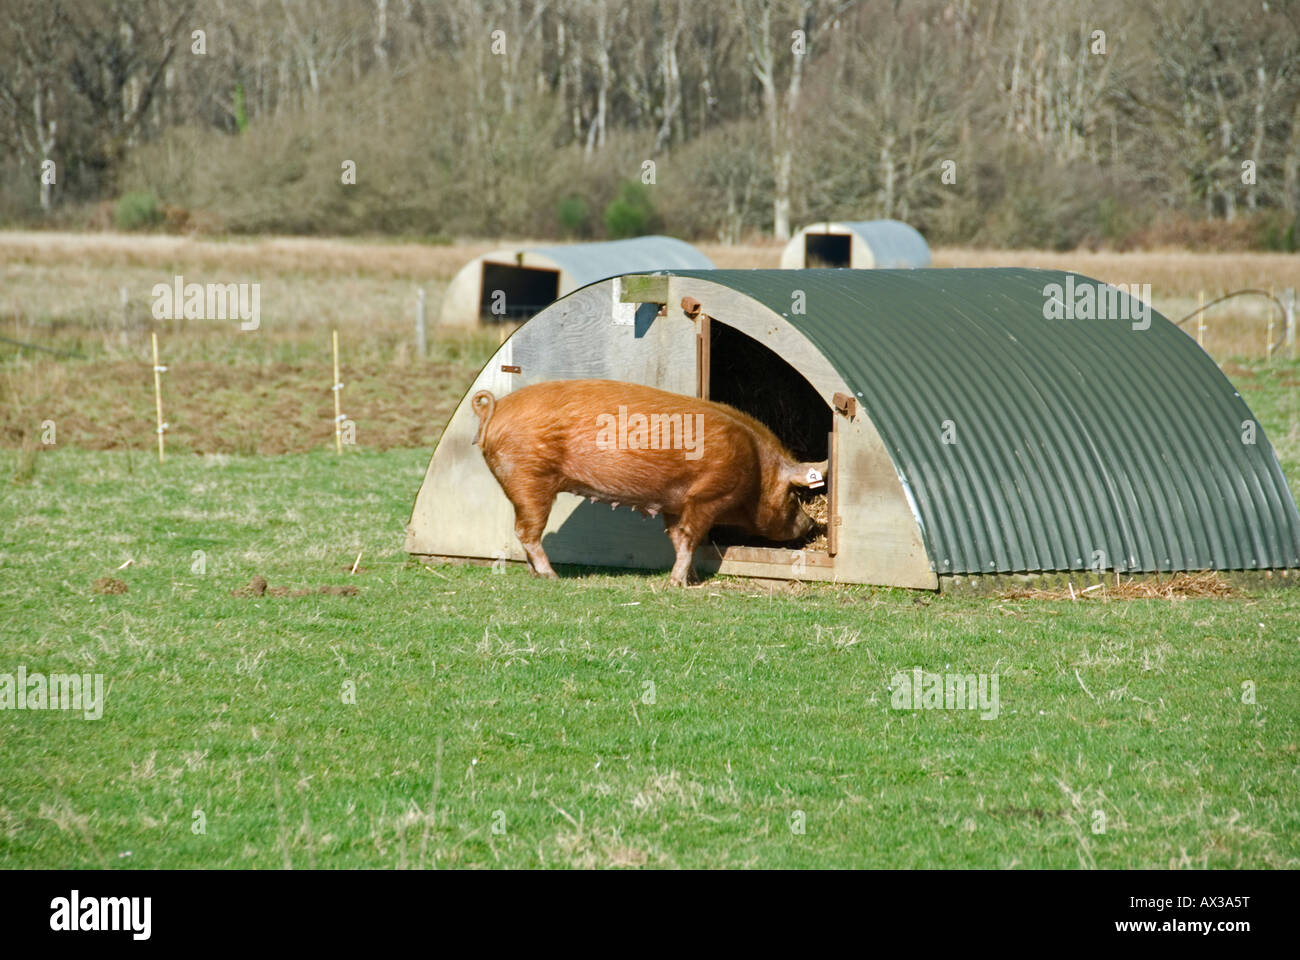 Stock photo of a Tamworth rare breed pig in a field next to her Pig arc The photo was taken in the Limousin region of France Stock Photo